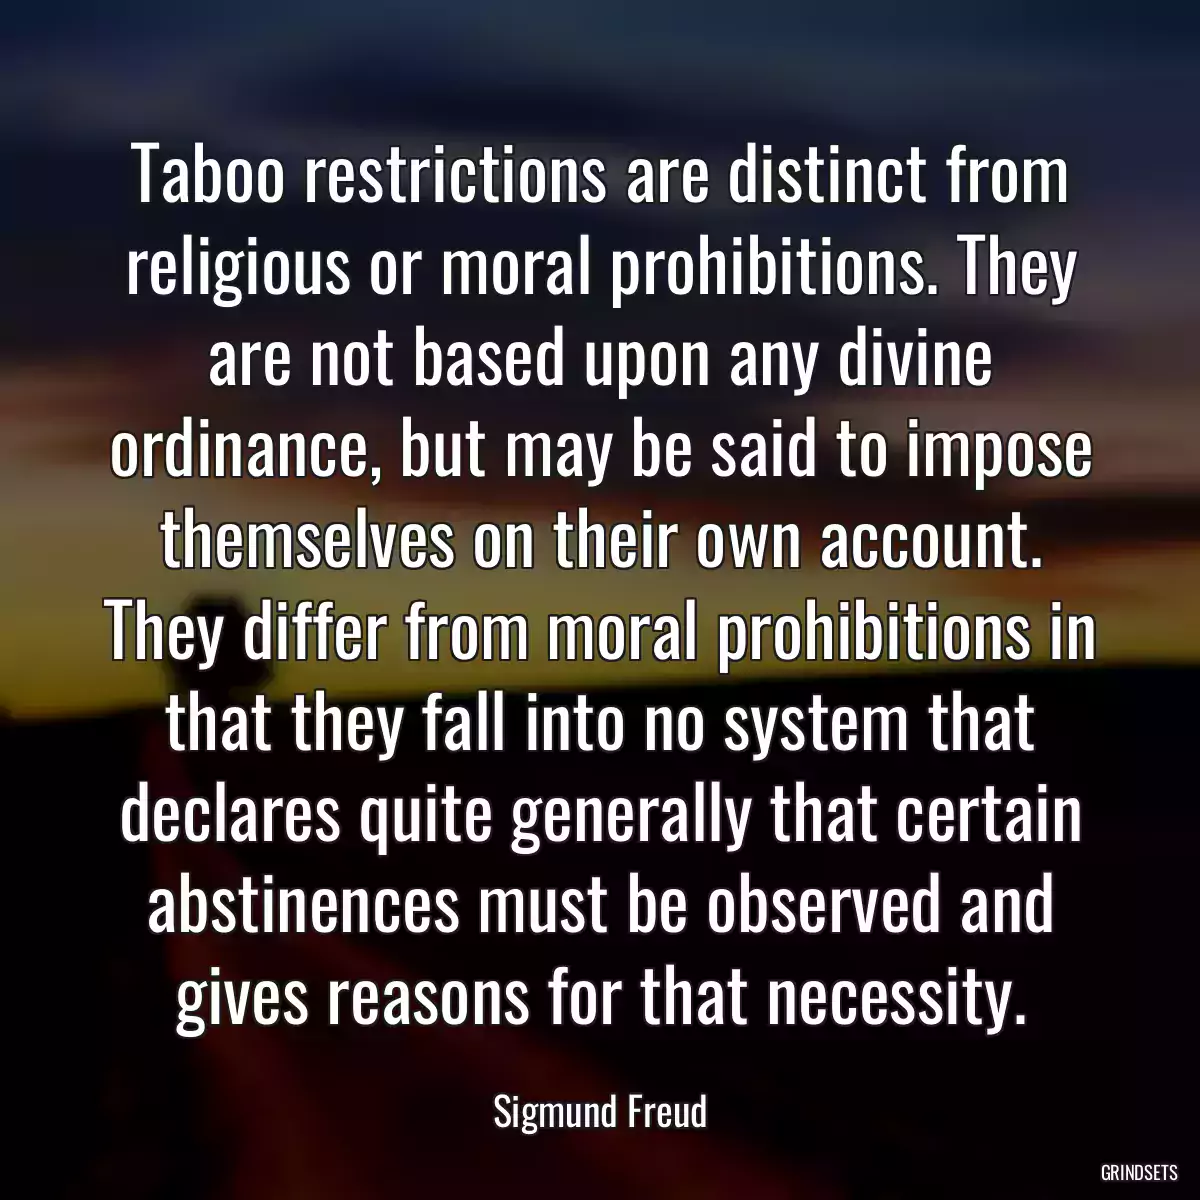 Taboo restrictions are distinct from religious or moral prohibitions. They are not based upon any divine ordinance, but may be said to impose themselves on their own account. They differ from moral prohibitions in that they fall into no system that declares quite generally that certain abstinences must be observed and gives reasons for that necessity.